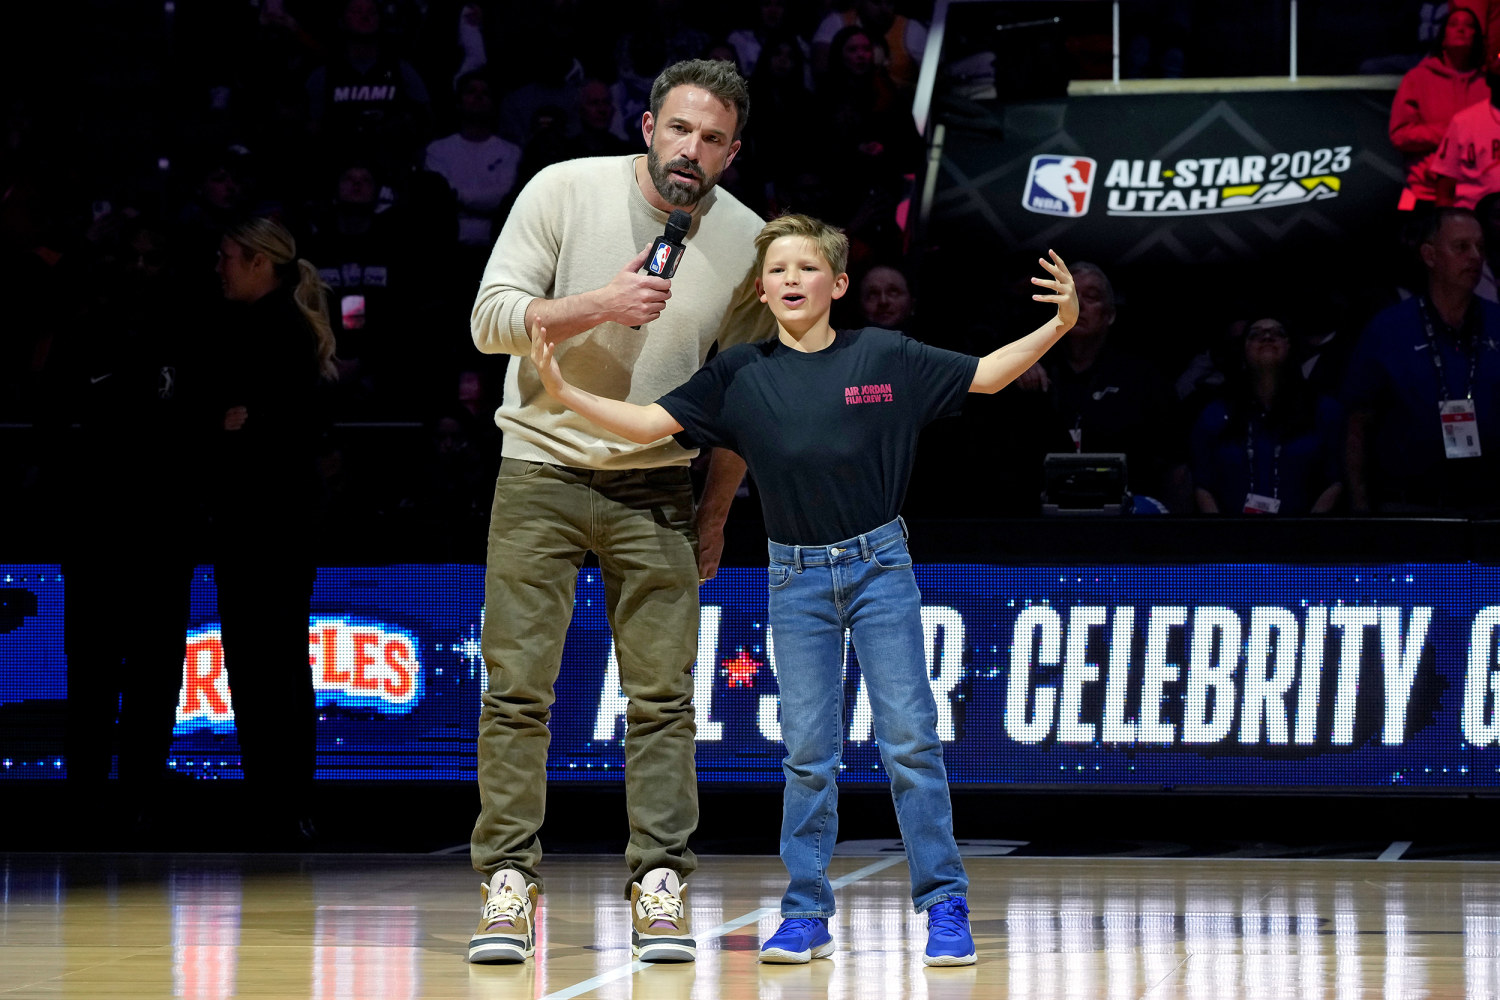 NBA Films for Fans' to tip off at NBA All-Star 2023